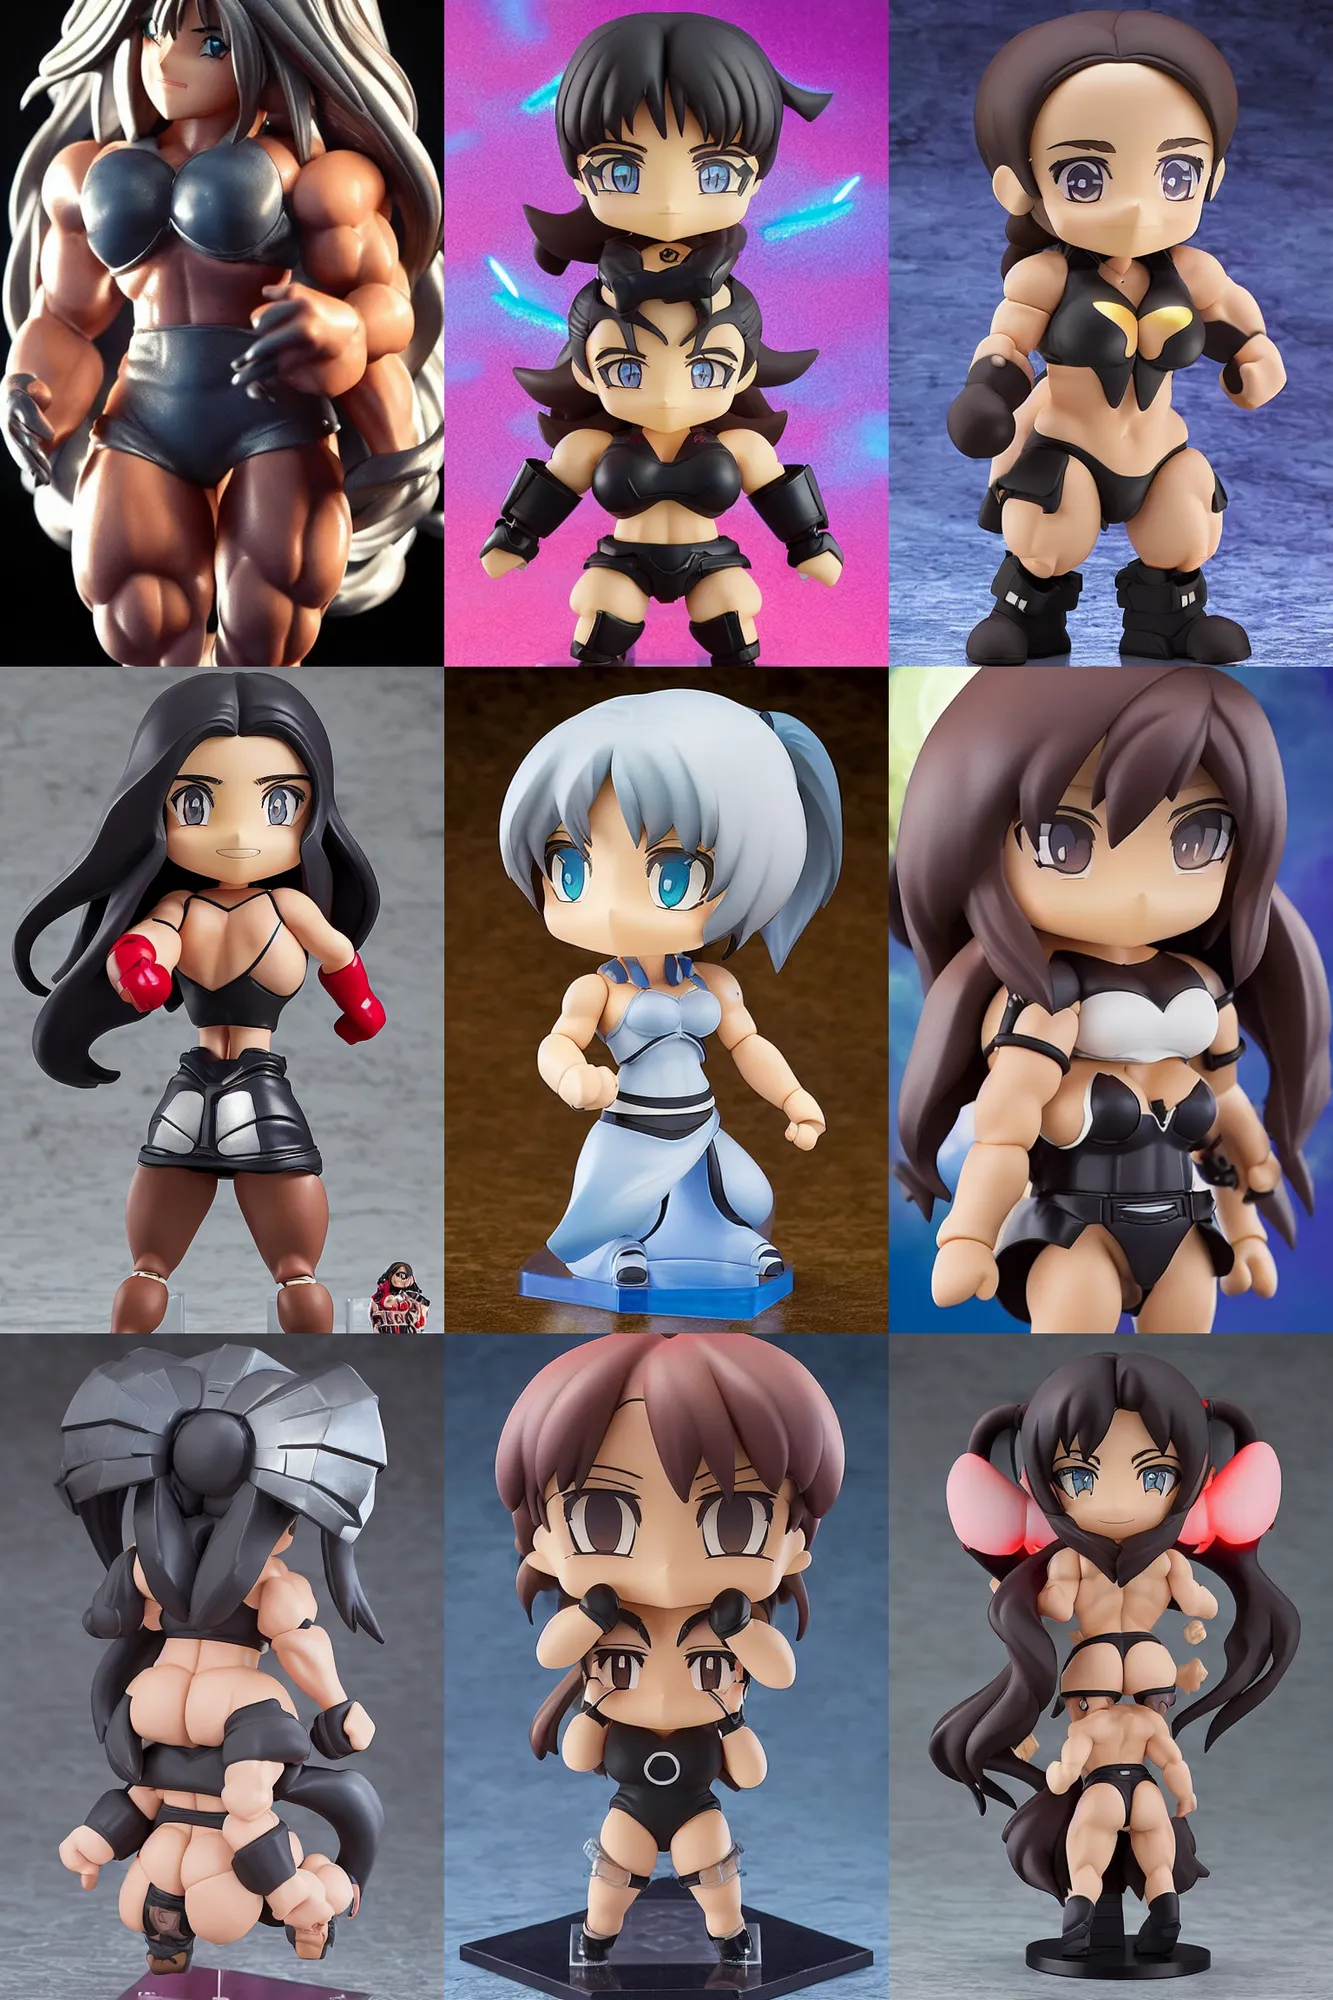 Prompt: jennifer connelly, 2 0 s, massive bodybuilder, rocekteer, an anime nendoroid of jennifer connelly, figurine, detailed product photo, halo above head, dramatic lighting